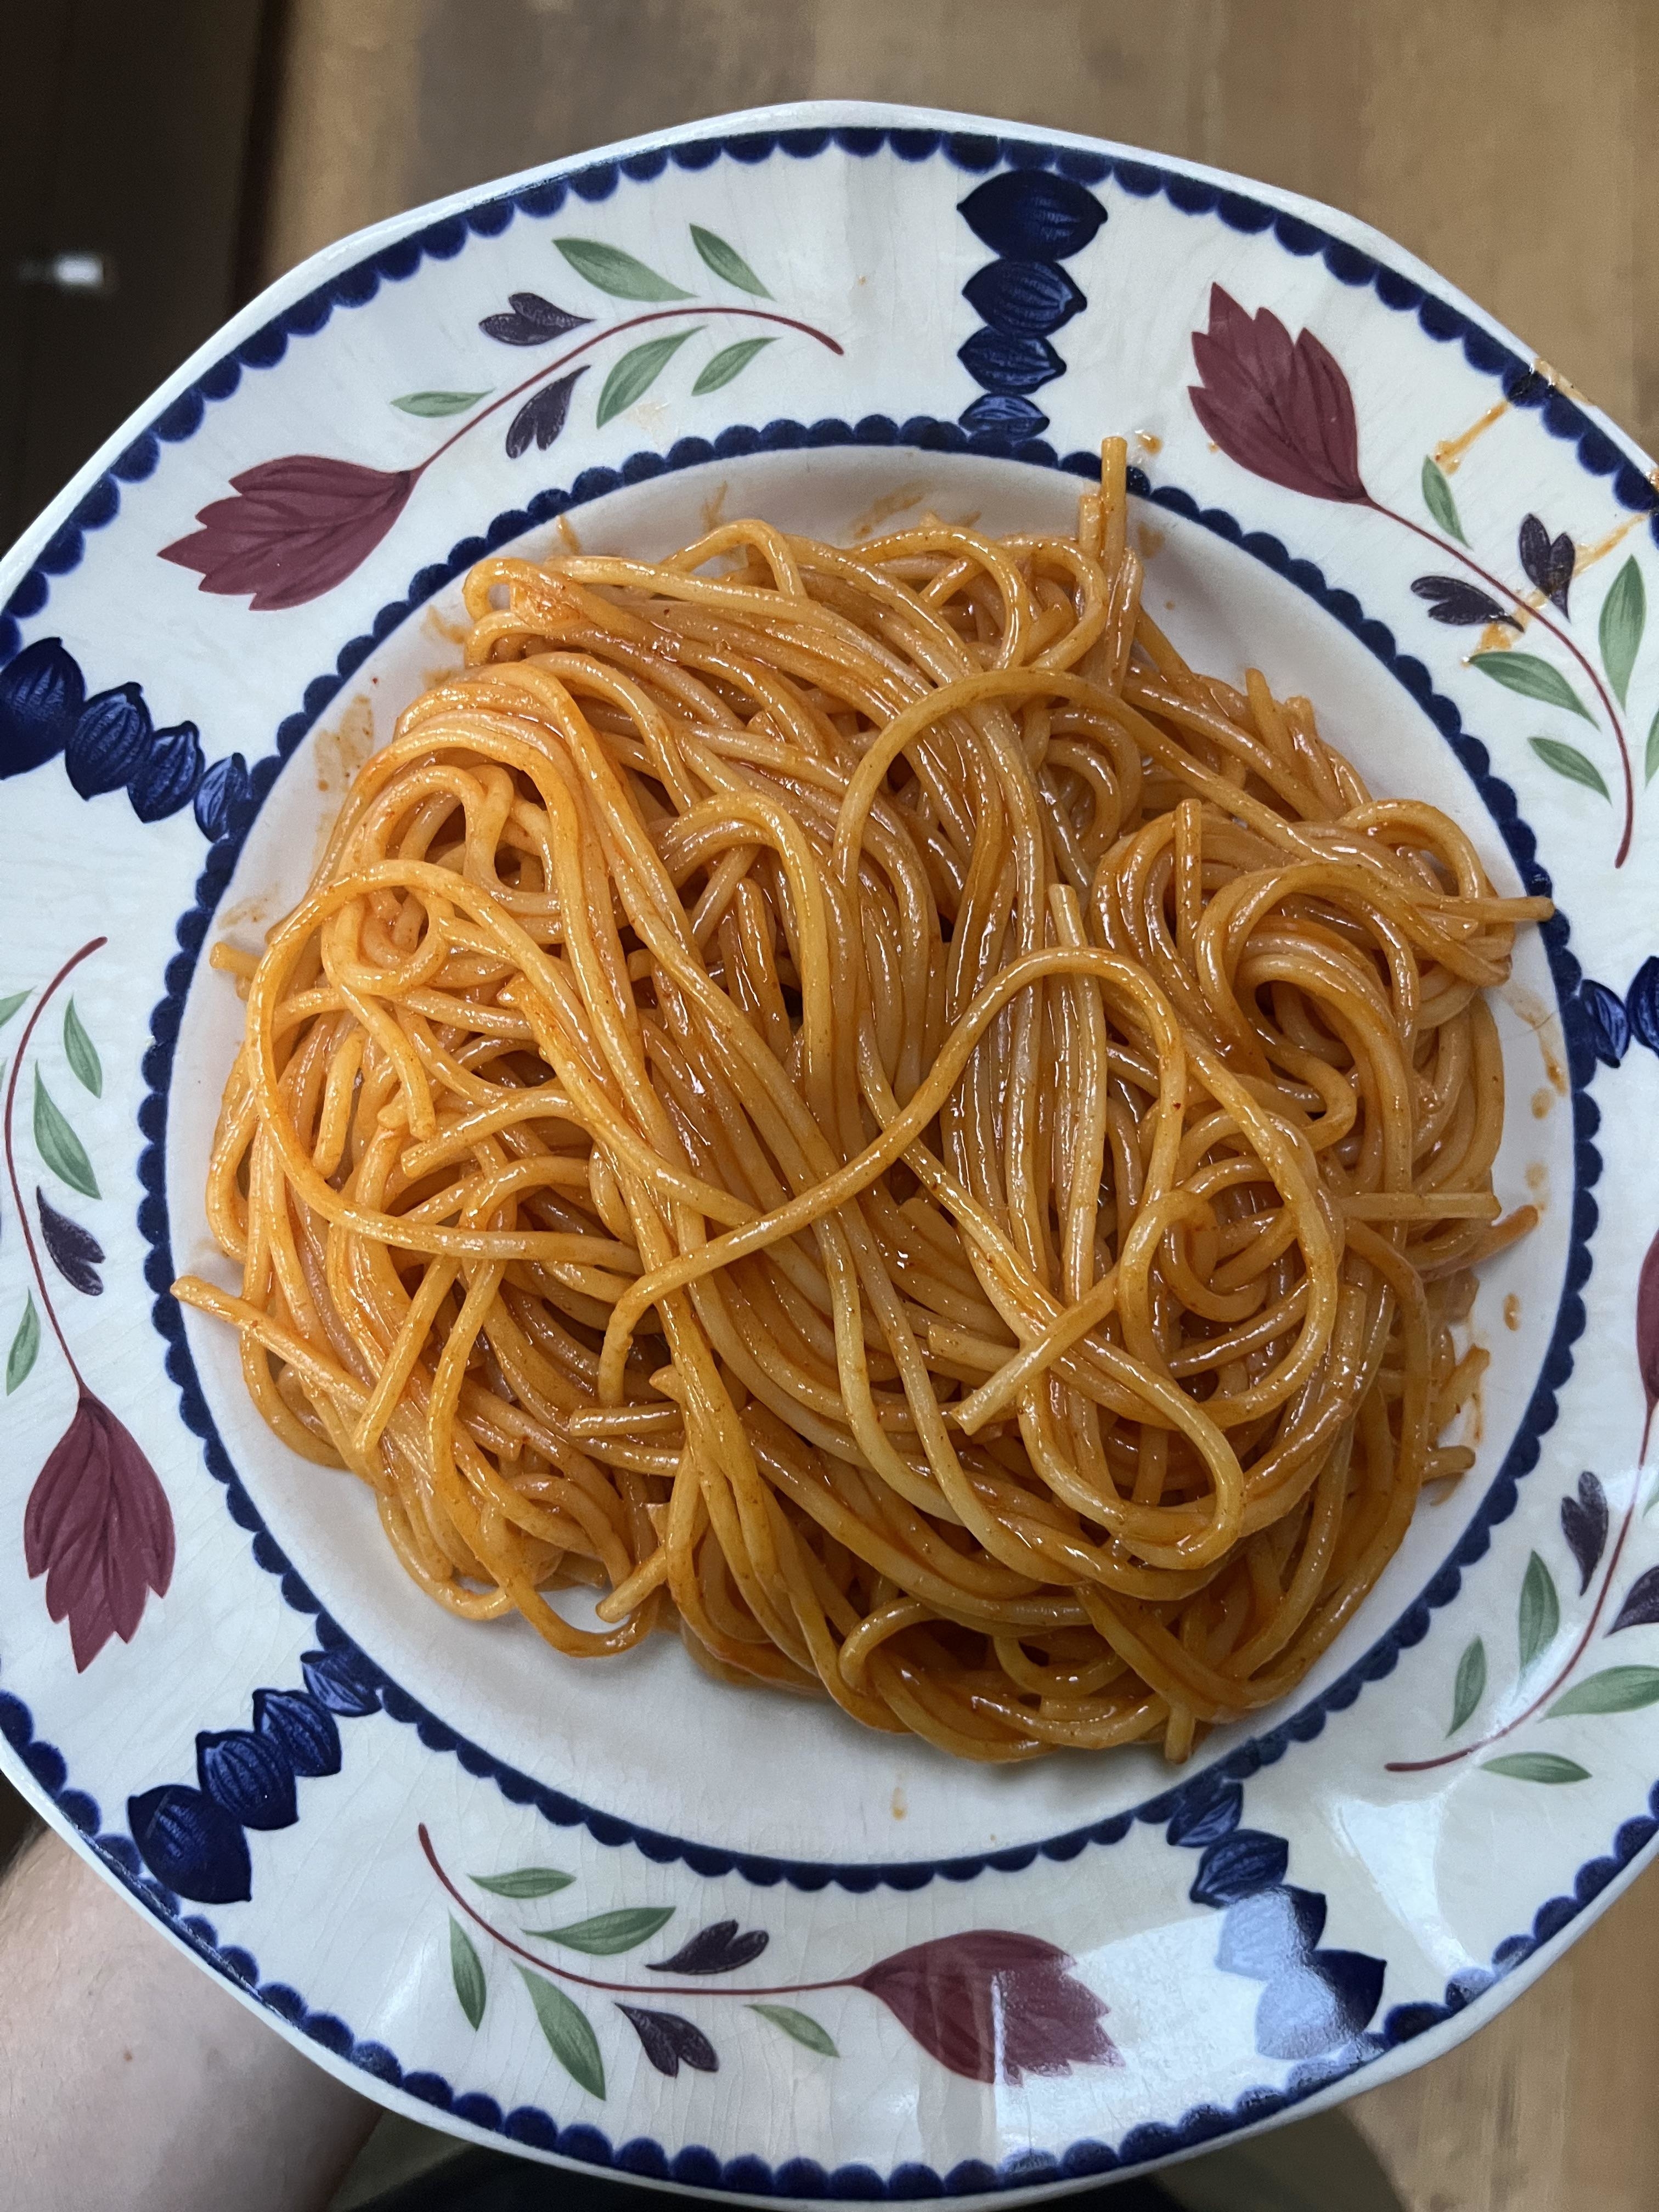 Plate of spaghetti with tomato sauce on a patterned plate